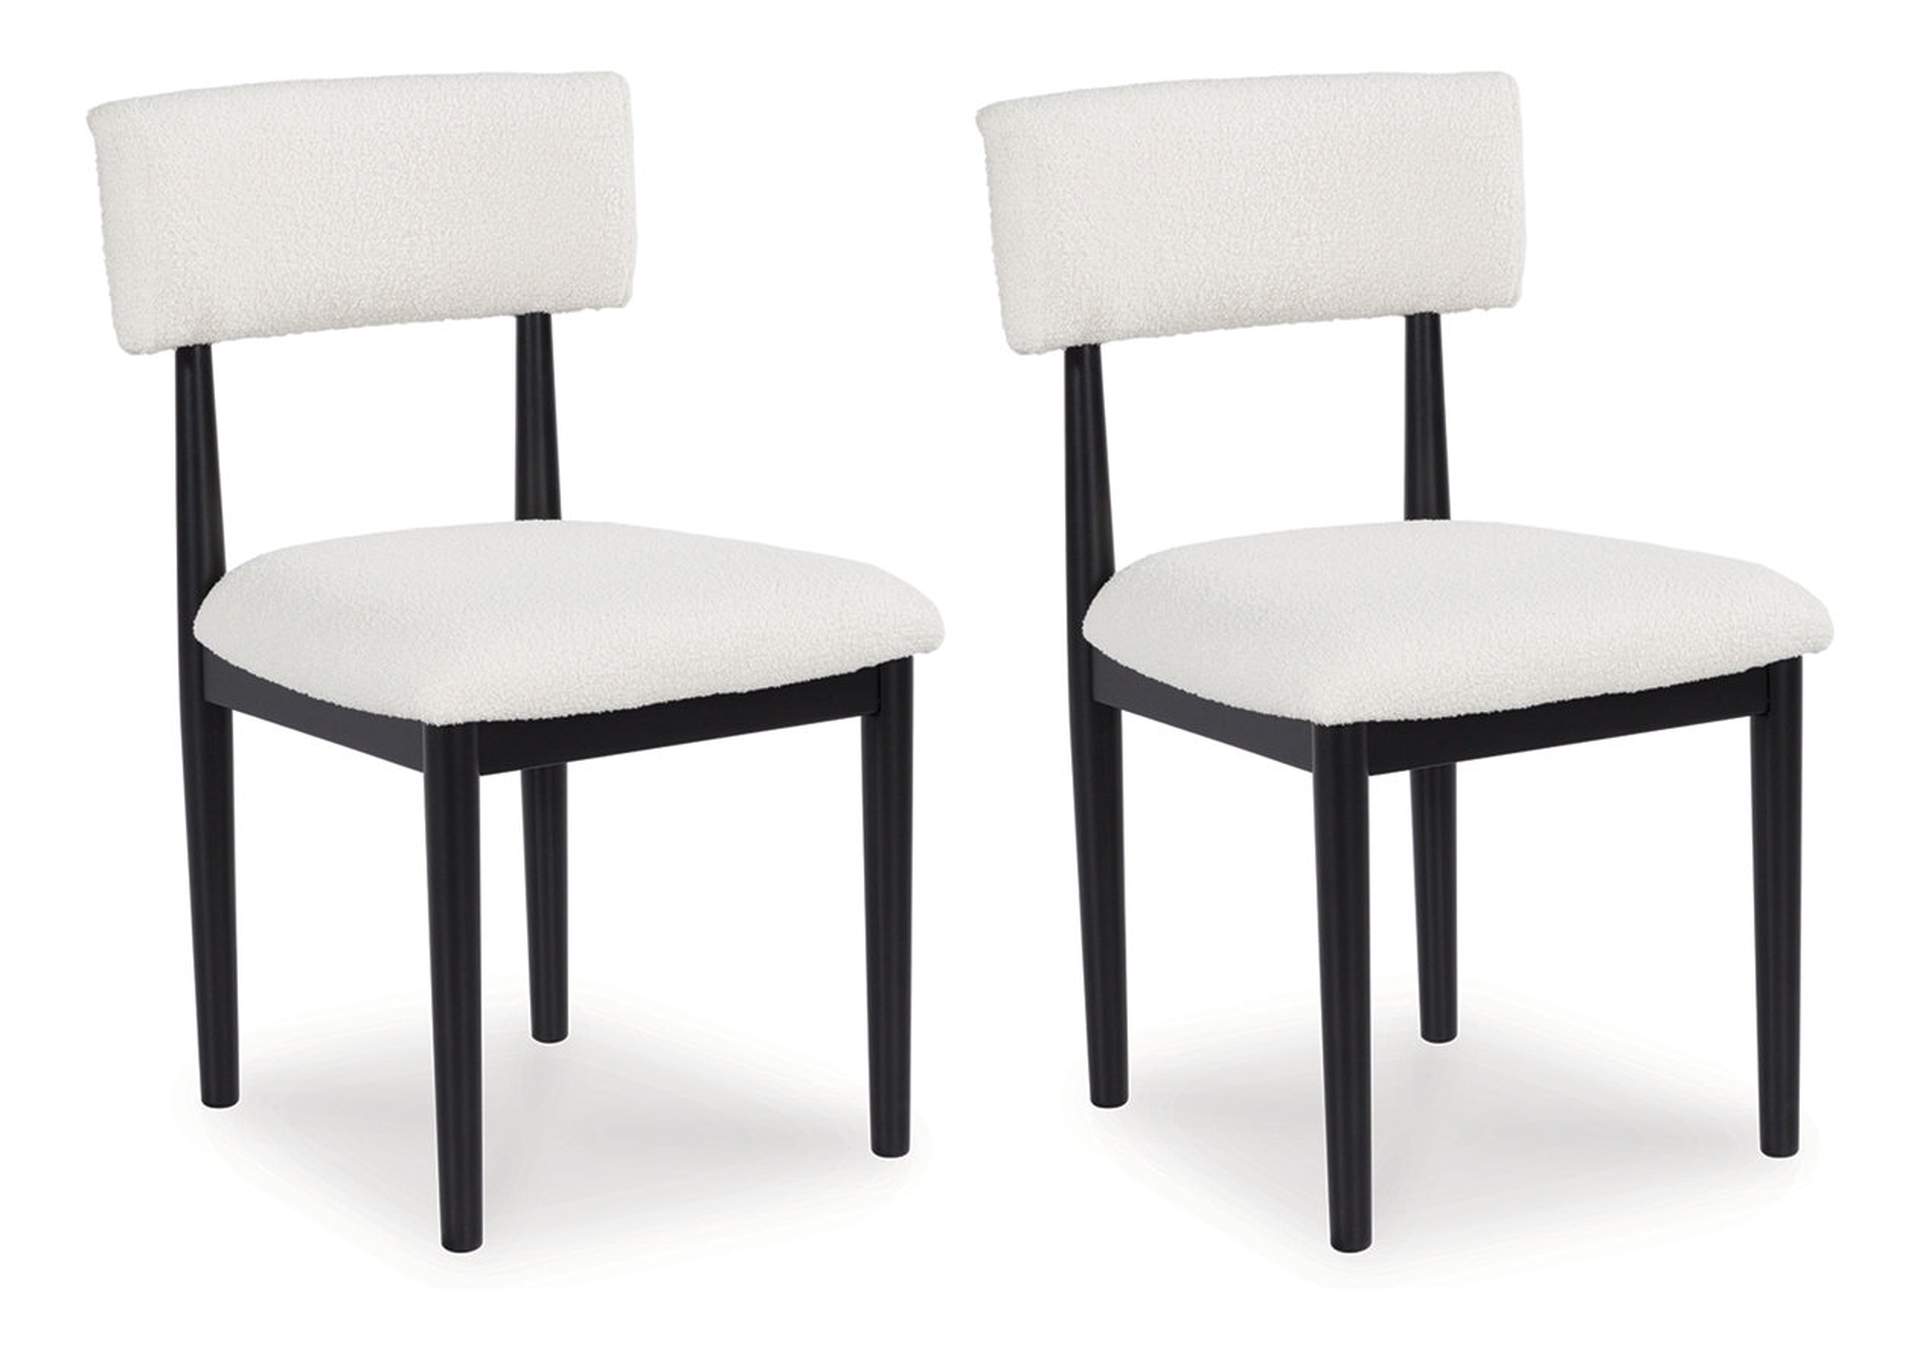 Xandrum Dining Chair,Signature Design By Ashley